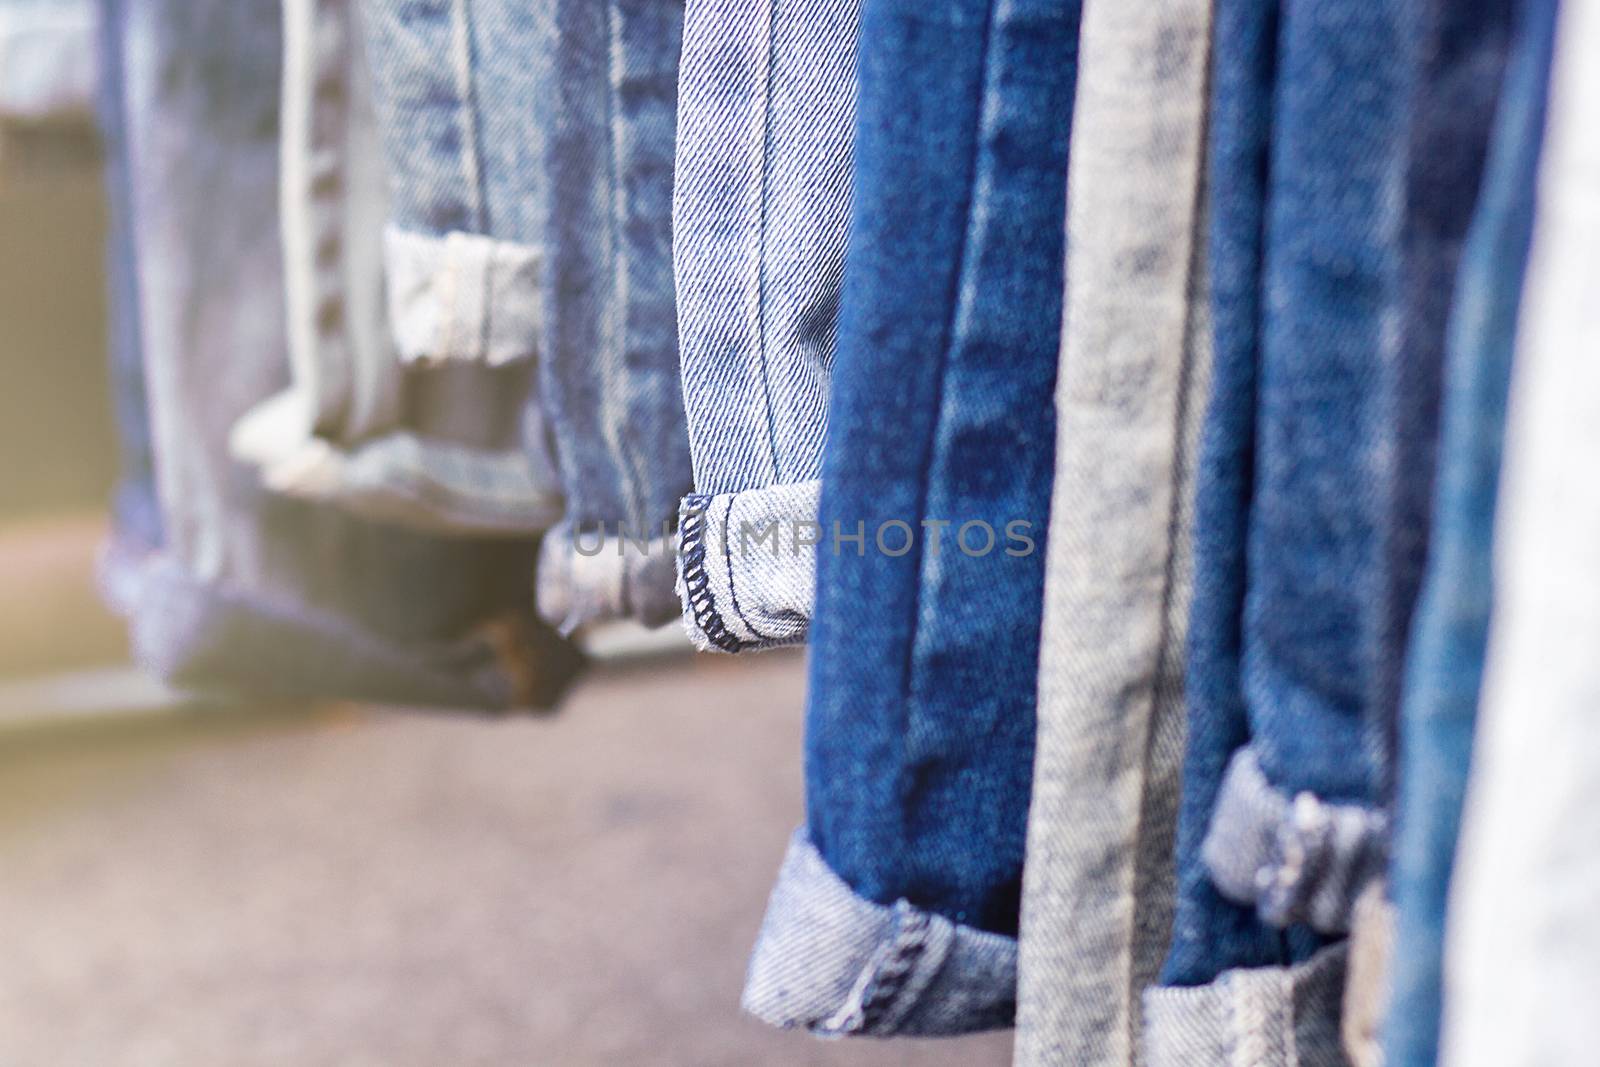 Lot of different blue jeans, selective focus